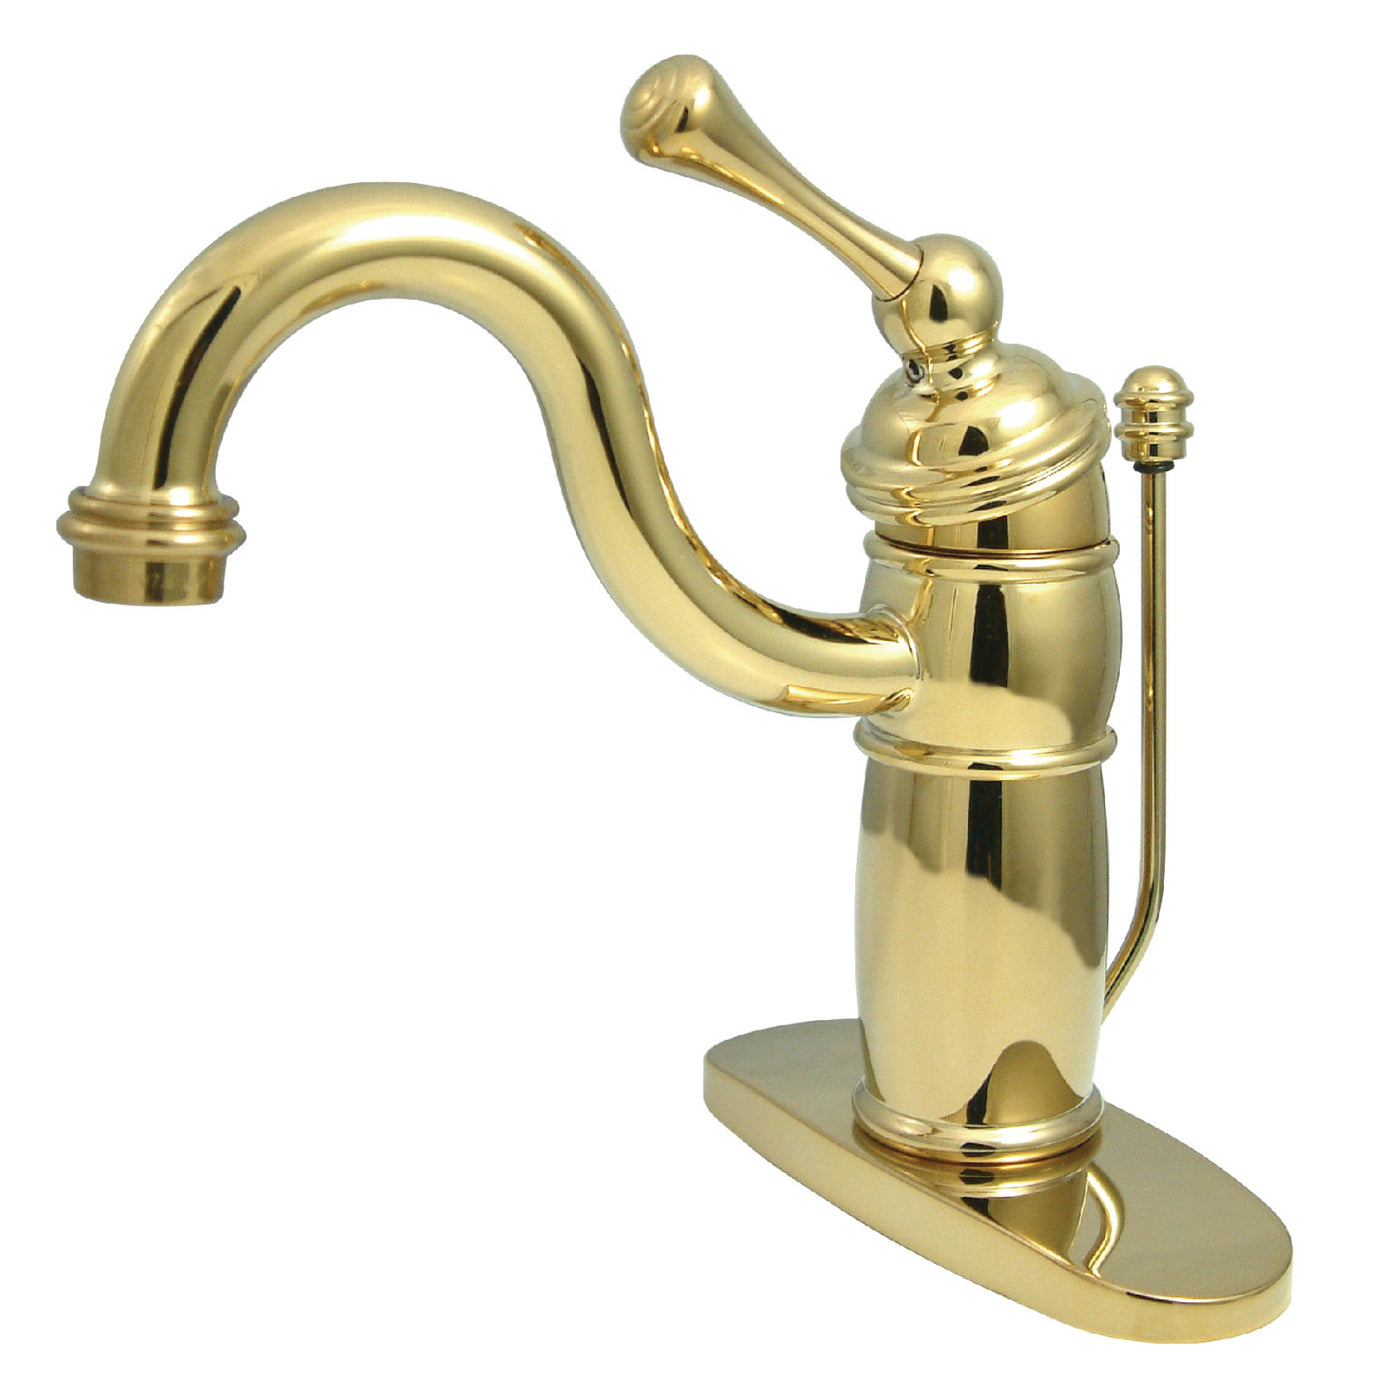 Elements of Design EB1402BL Single-Handle Bathroom Faucet with Pop-Up Drain, Polished Brass